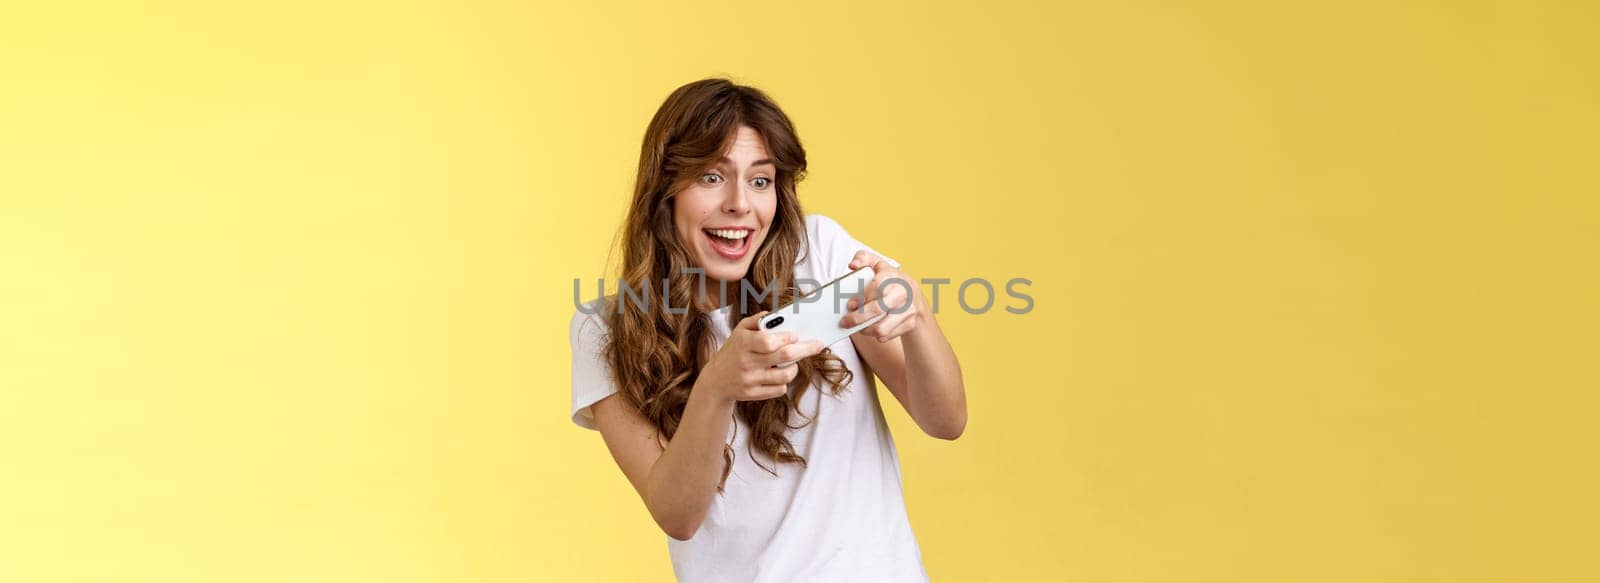 Excited playful enthusiastic girl tilting sideways playing awesome interesting smartphone game car racing smiling determined focuse gaming hold mobile phone horizontal tap display yellow background by Benzoix